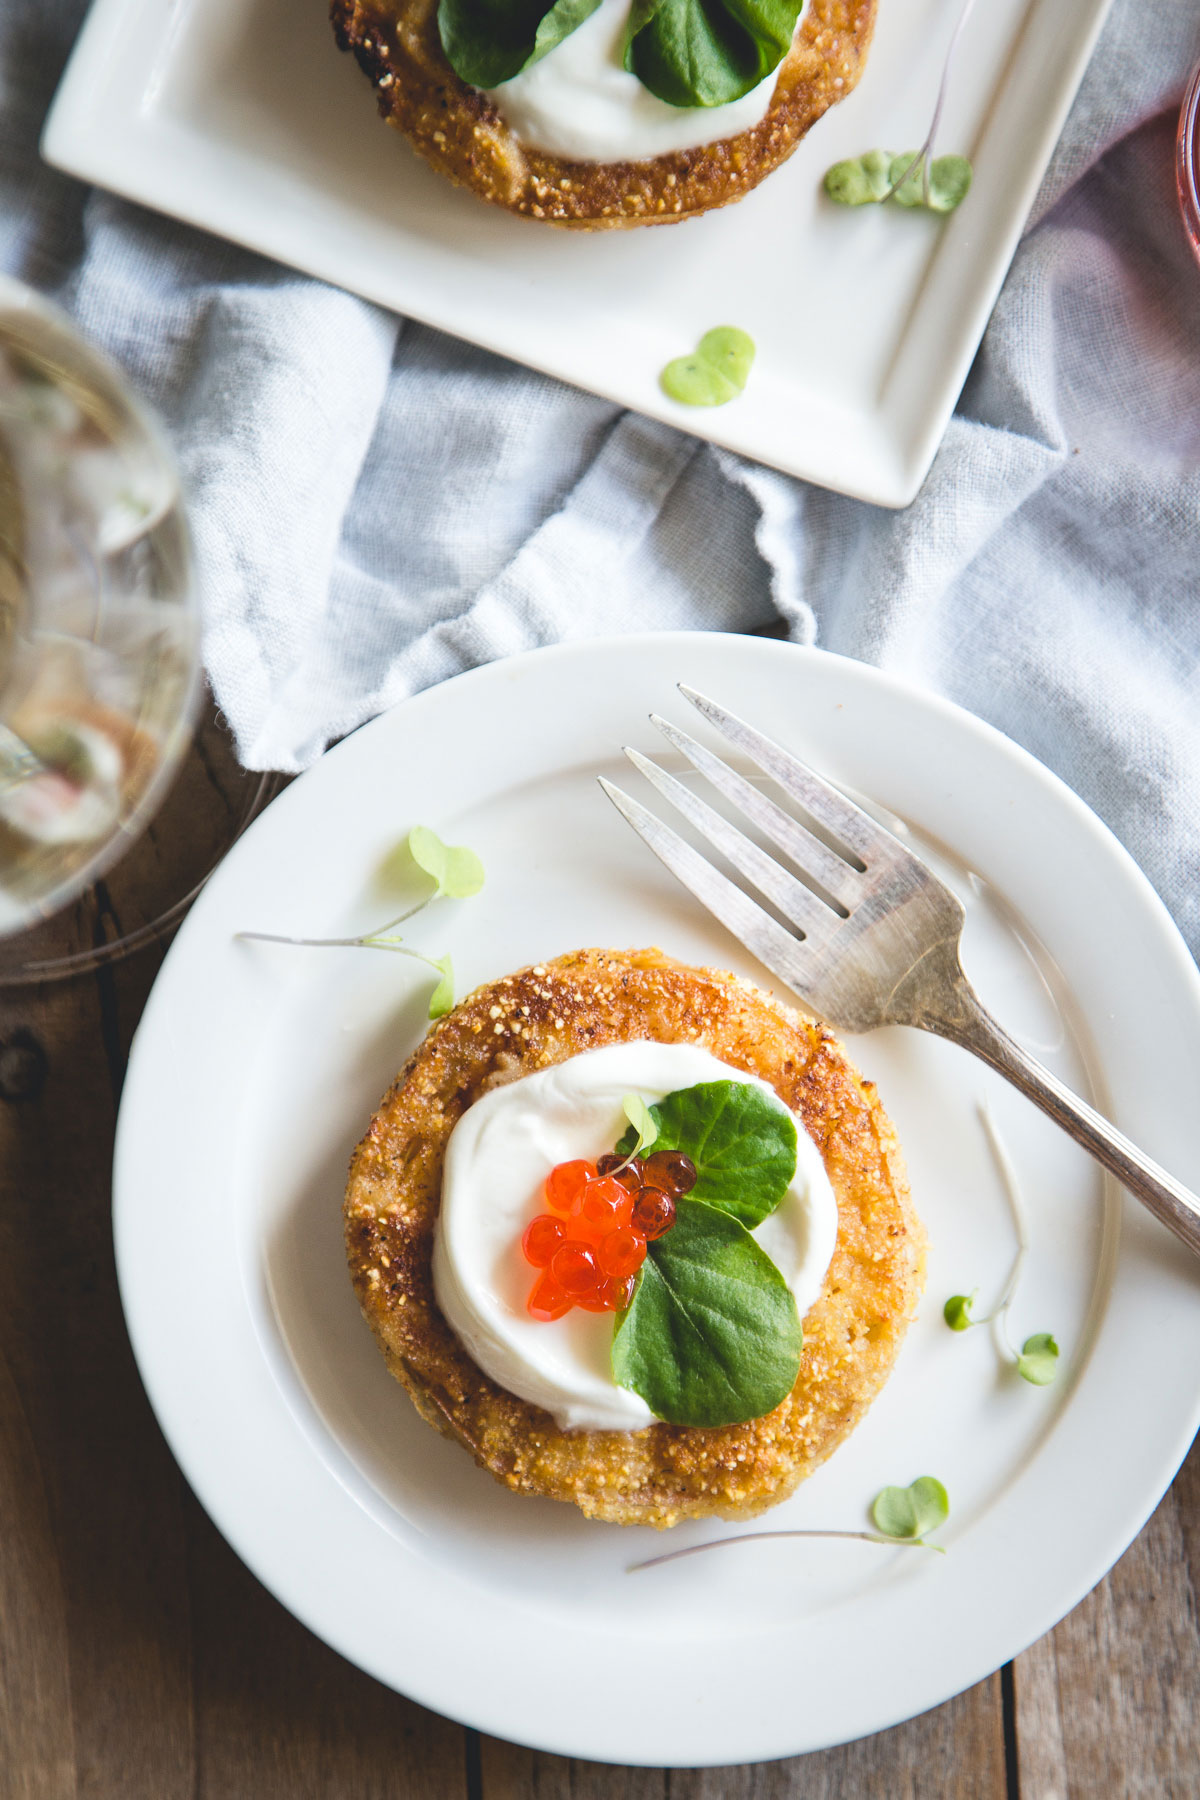 Want to make this classic even better? Try pairing this fried green tomatoes with fromage blanc with our Kendall-Jackson Sauvignon Blanc!